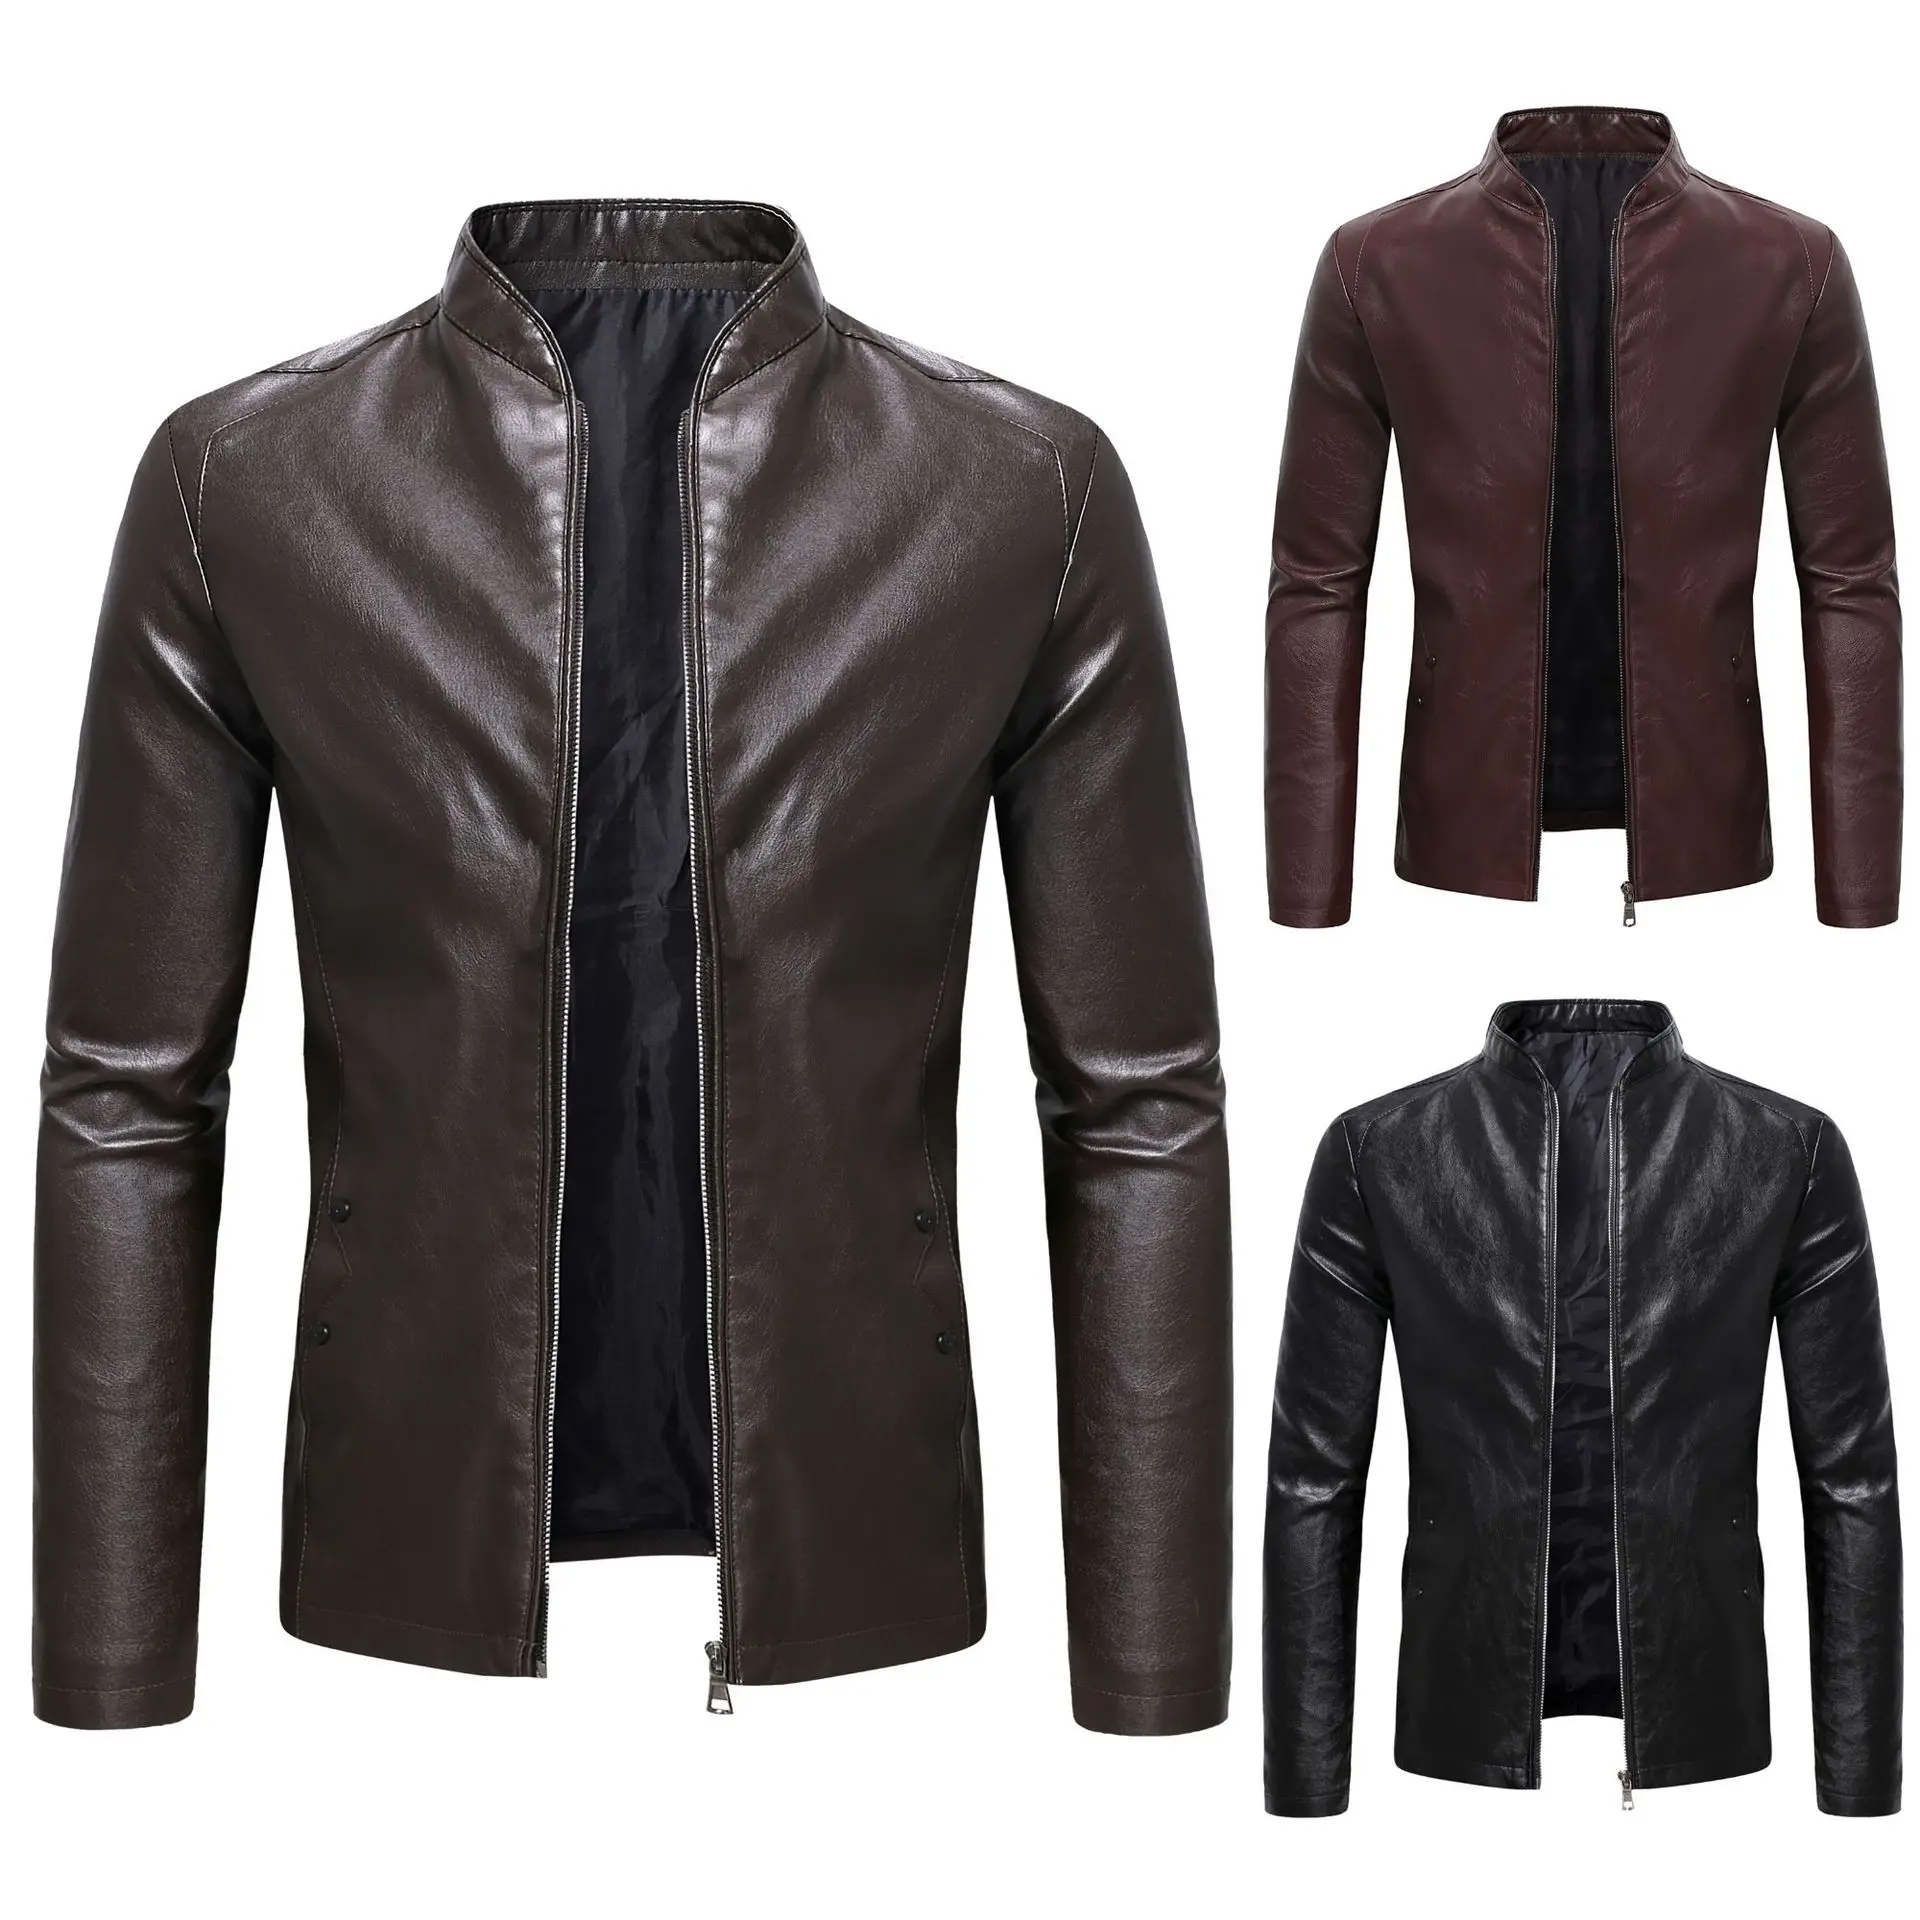 Simple Men's Stand Collar Leather Jacket All-match Everyday Casual Leather Jacket High Quality Man Windproof Faux Leather Jacket mens leather bomber jacket